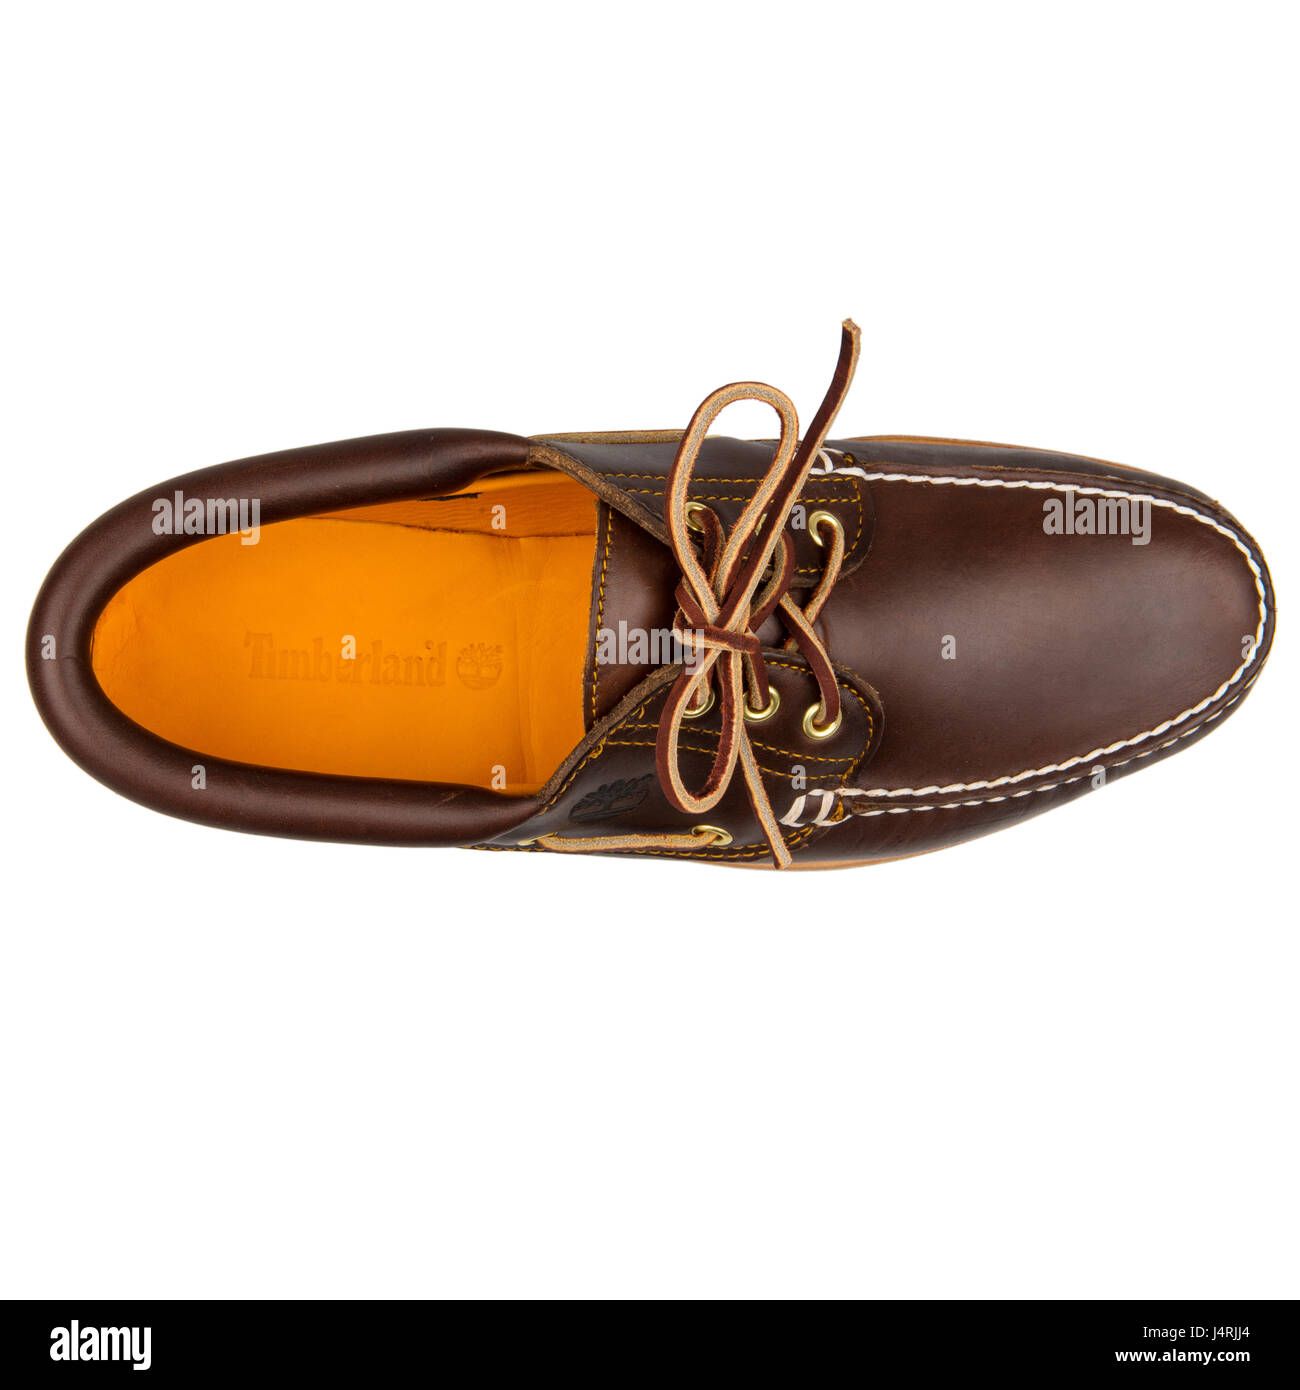 Registration praise system Timberland 3-Eye Classic Handsewn Lug Shoes Brown - 30003 Stock Photo -  Alamy